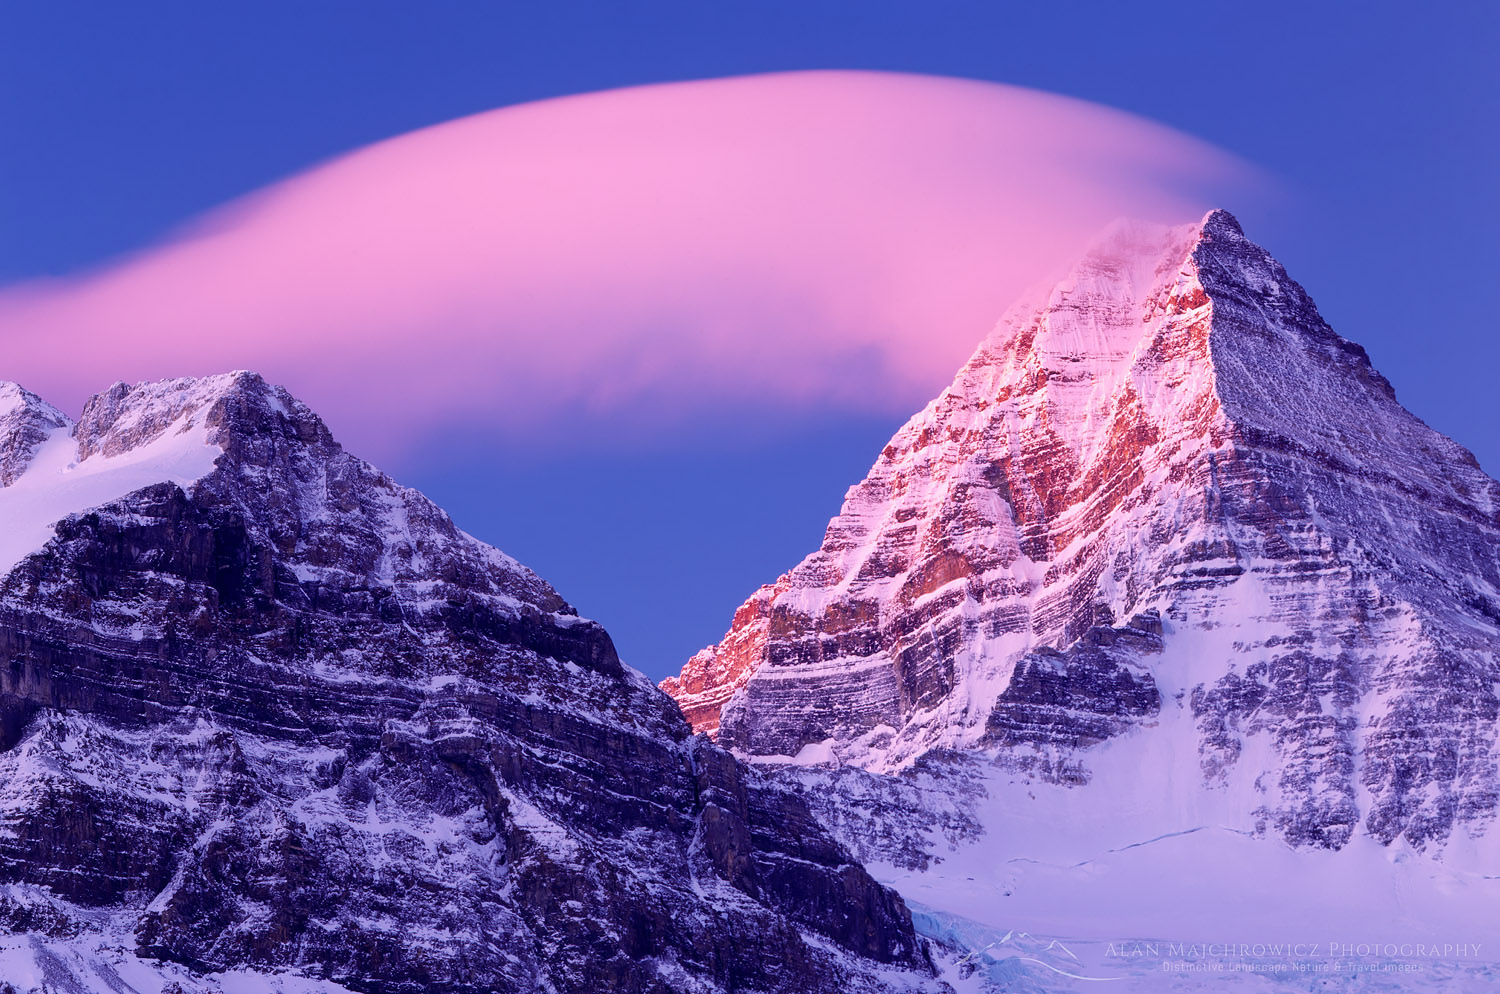 Cloud streaming off summit of Mount Assiniboine in winter, Mount Assiniboine Provincial Park British Columbia #3248